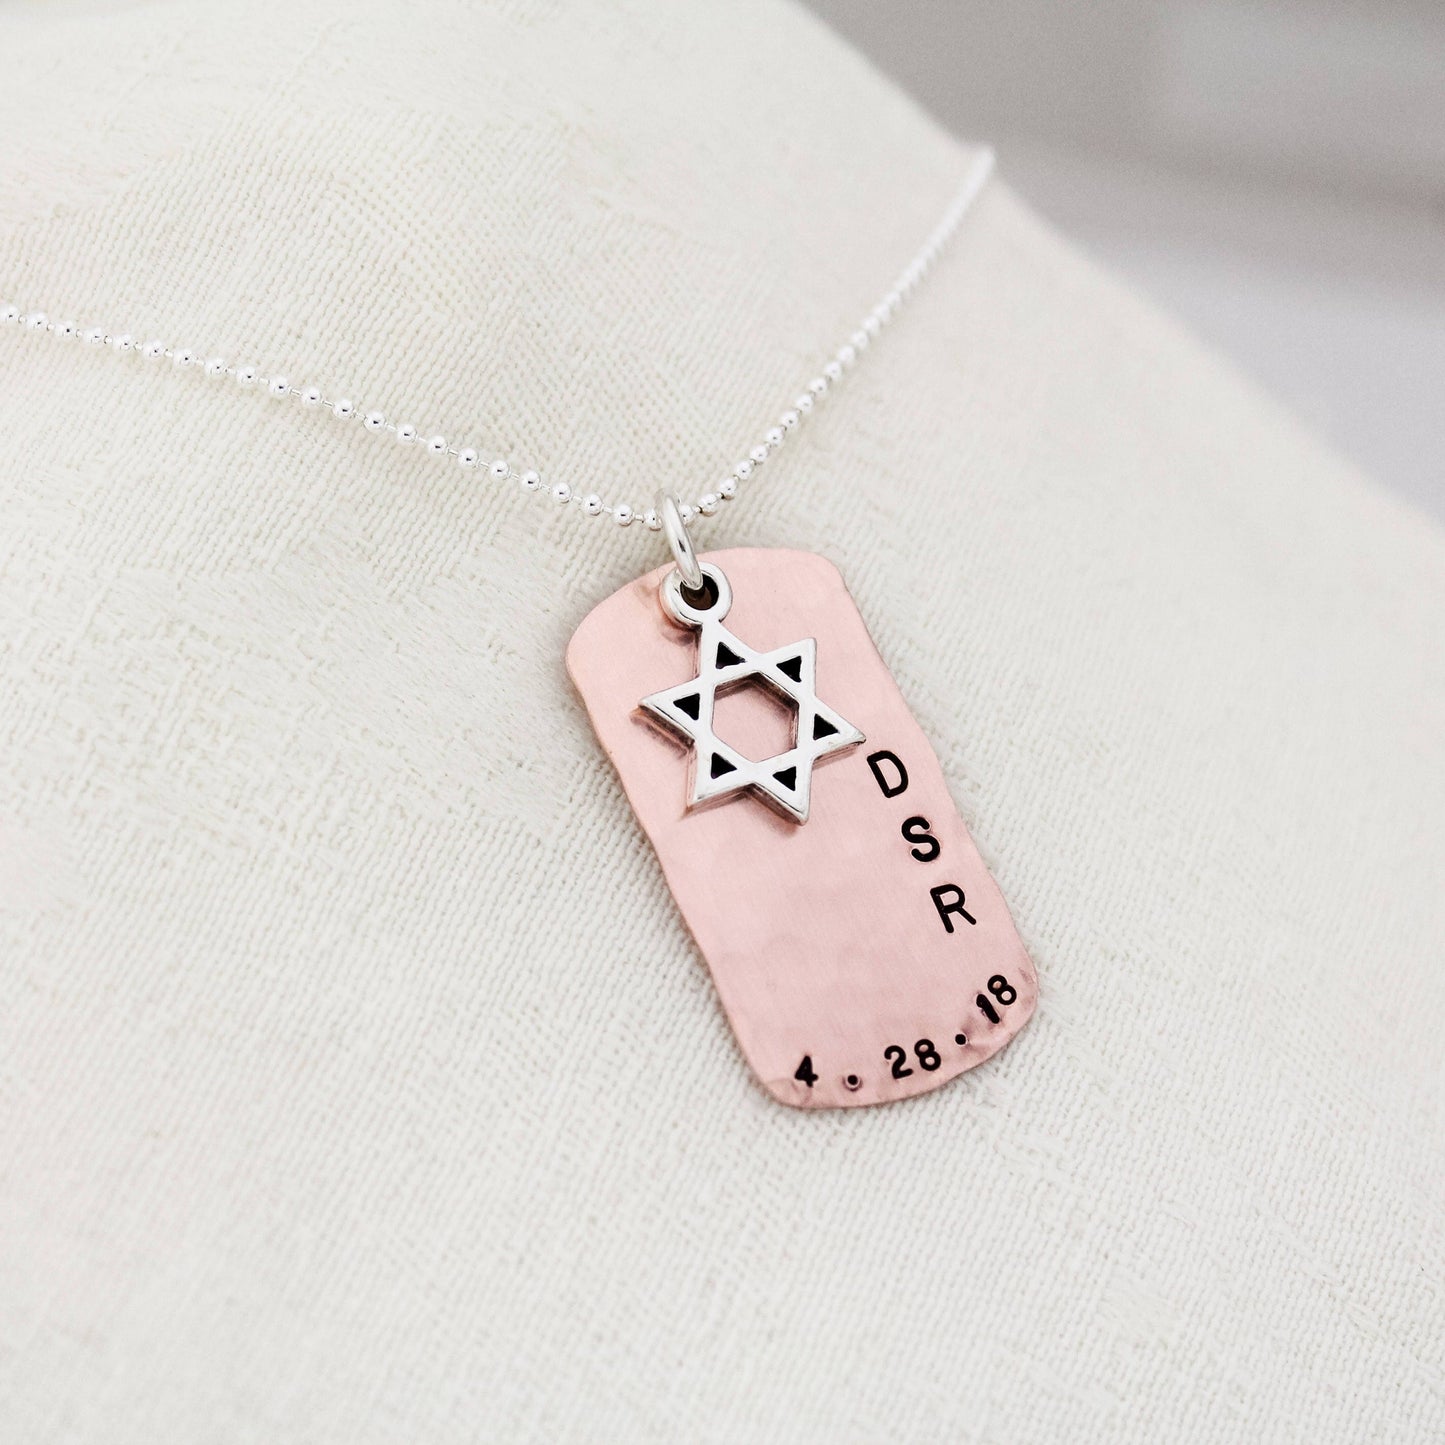 Teen Boys Bar Mitzvah Necklace, Copper Dog Tag Star of David Necklace for Boys, Jewish Star Necklace, Hand Stamped and Personalized